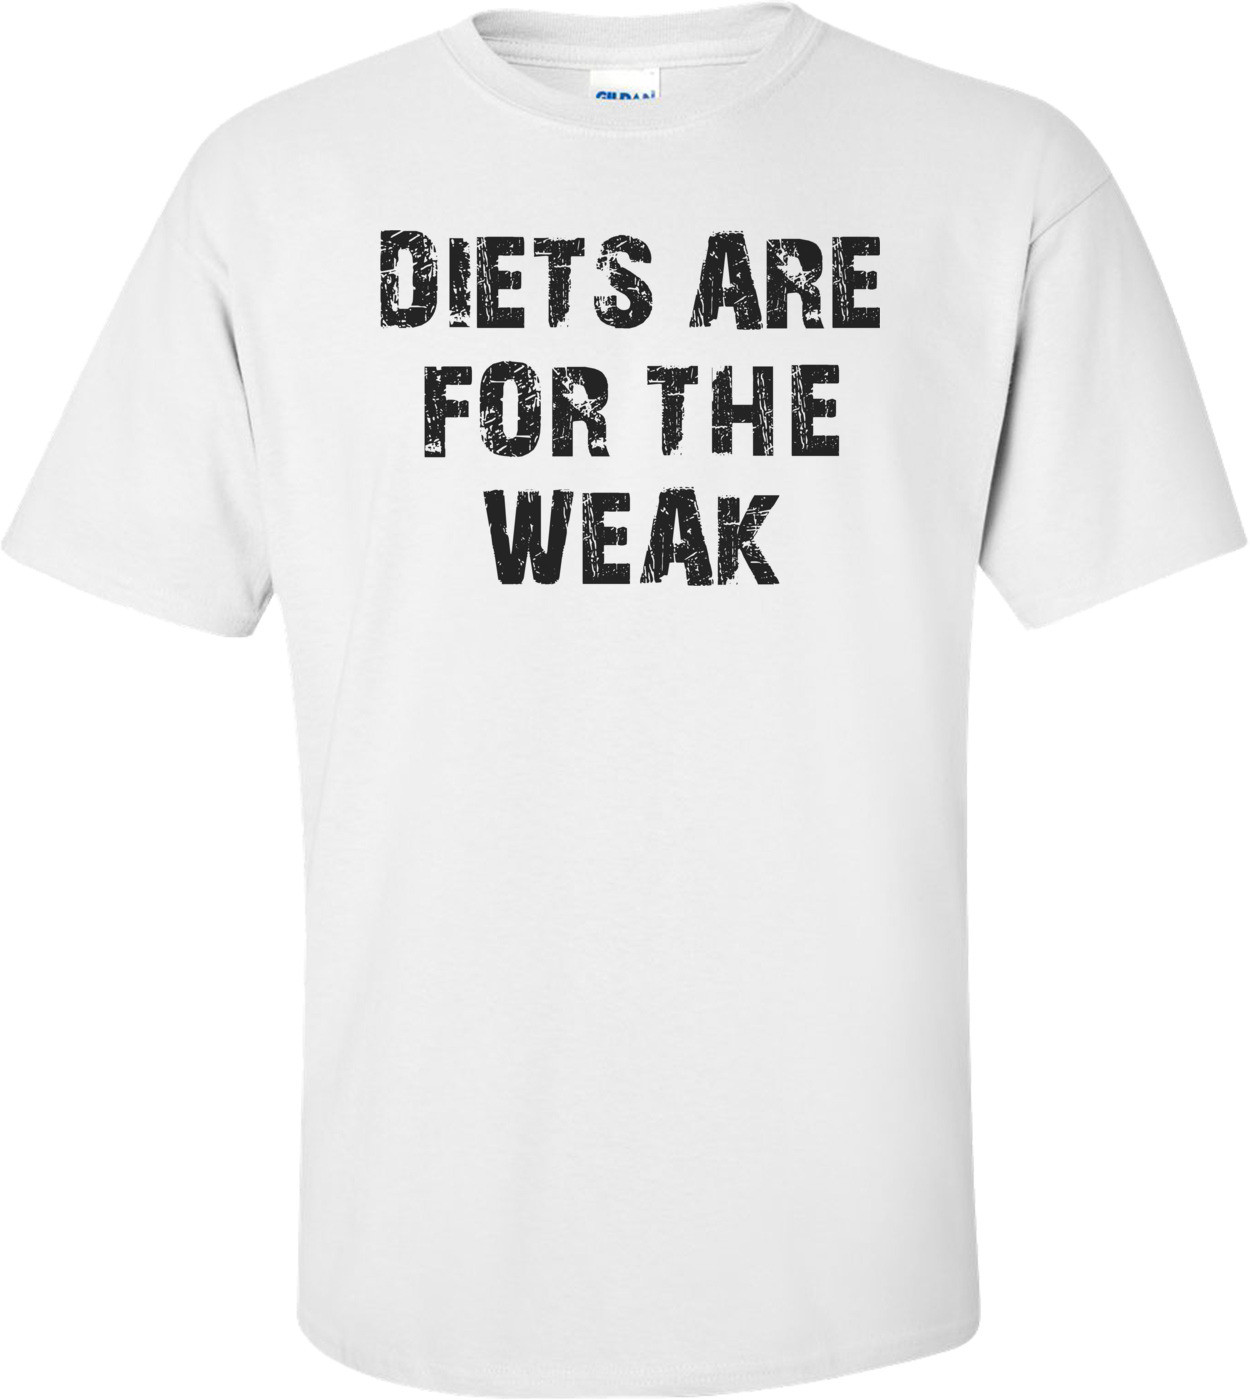 DIETS ARE FOR THE WEAK Shirt